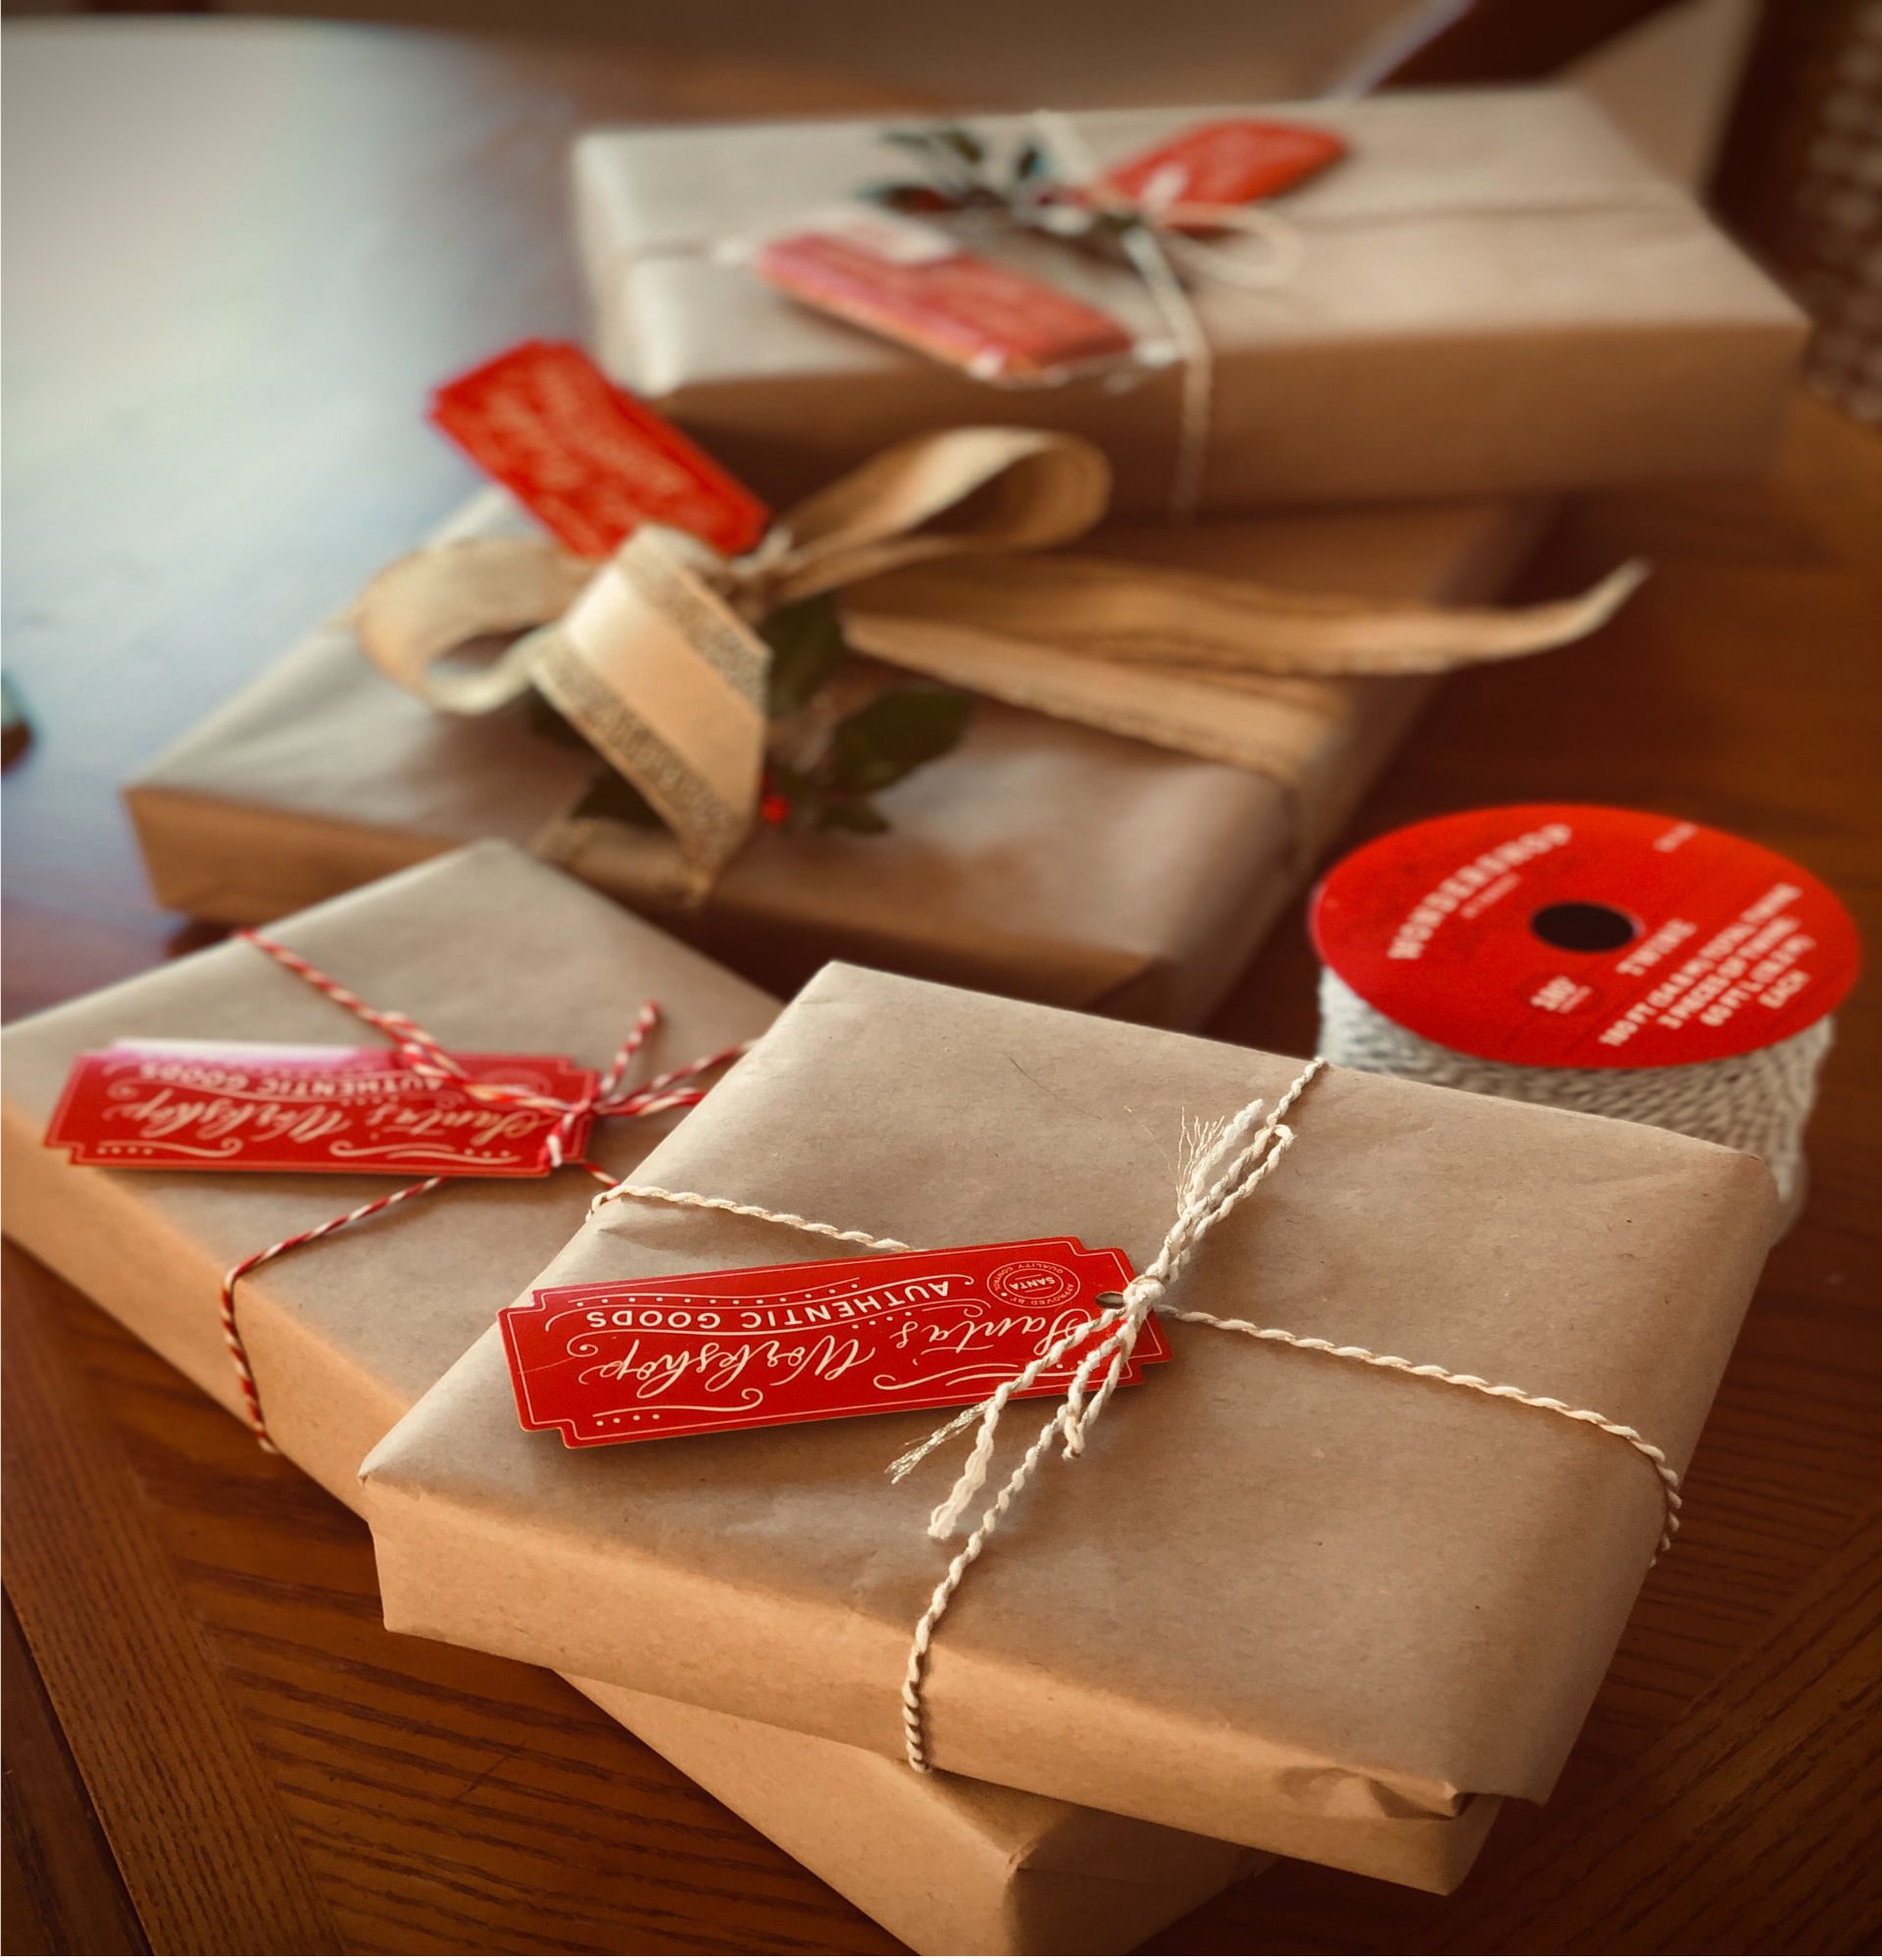 Gifts in wrapped recycled paper